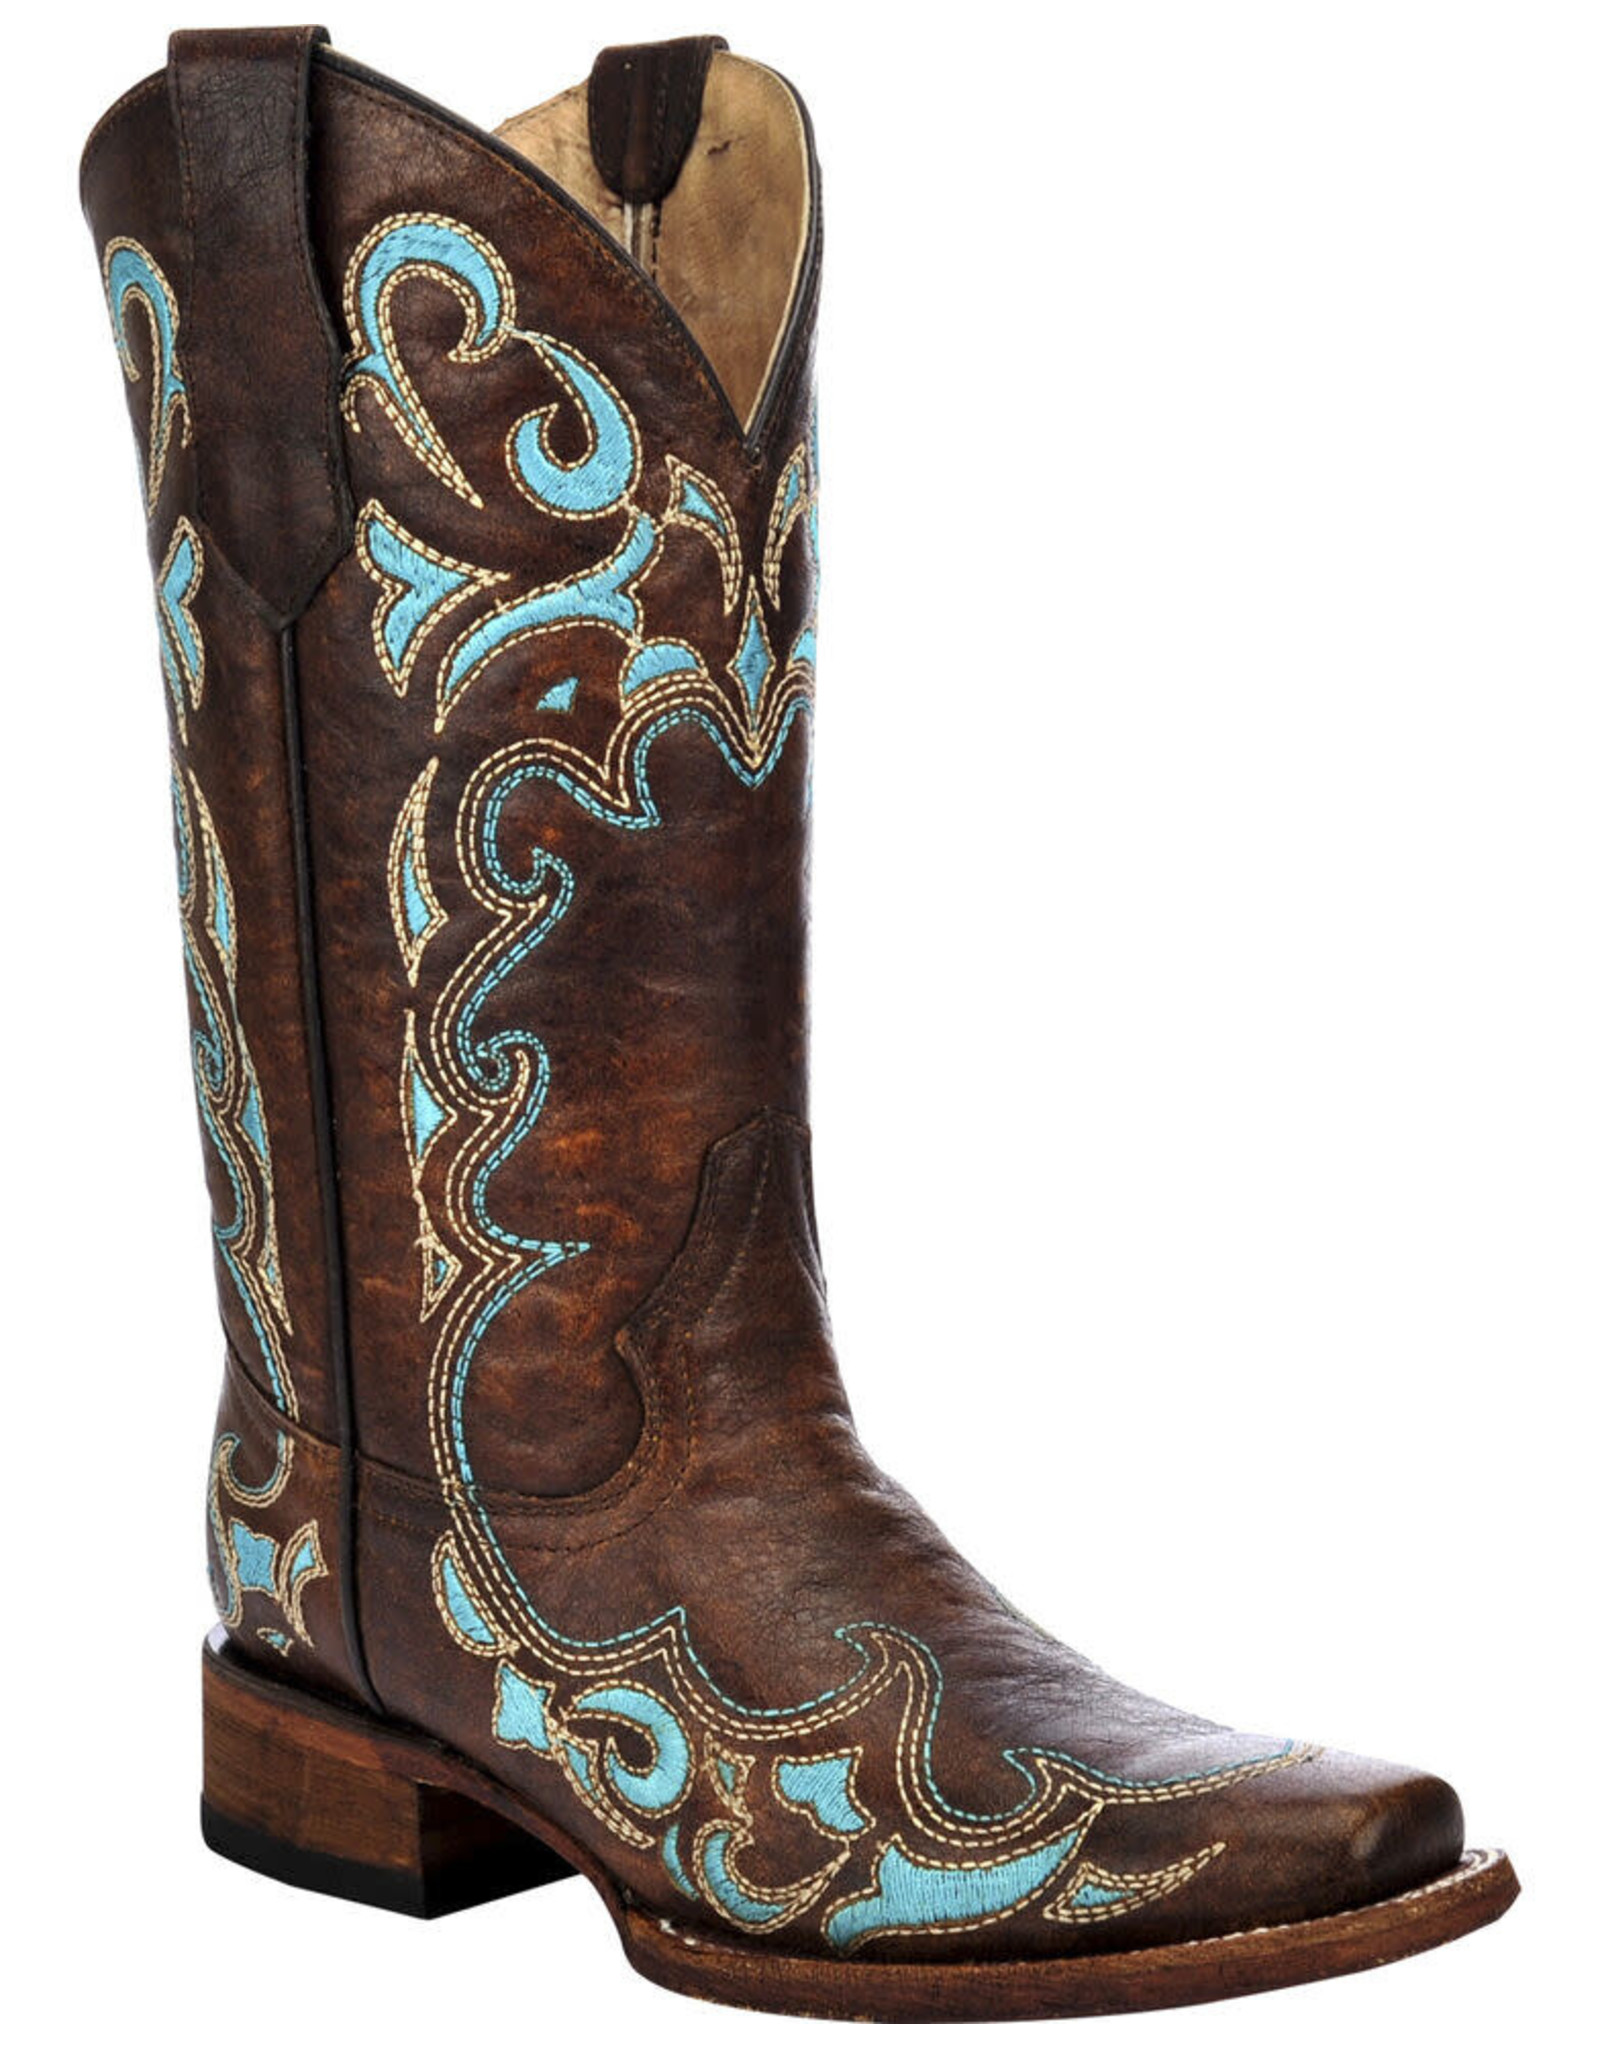 Circle G Ladies Honey Brown/Turquoise Side Embroidery L5239 Western Boots